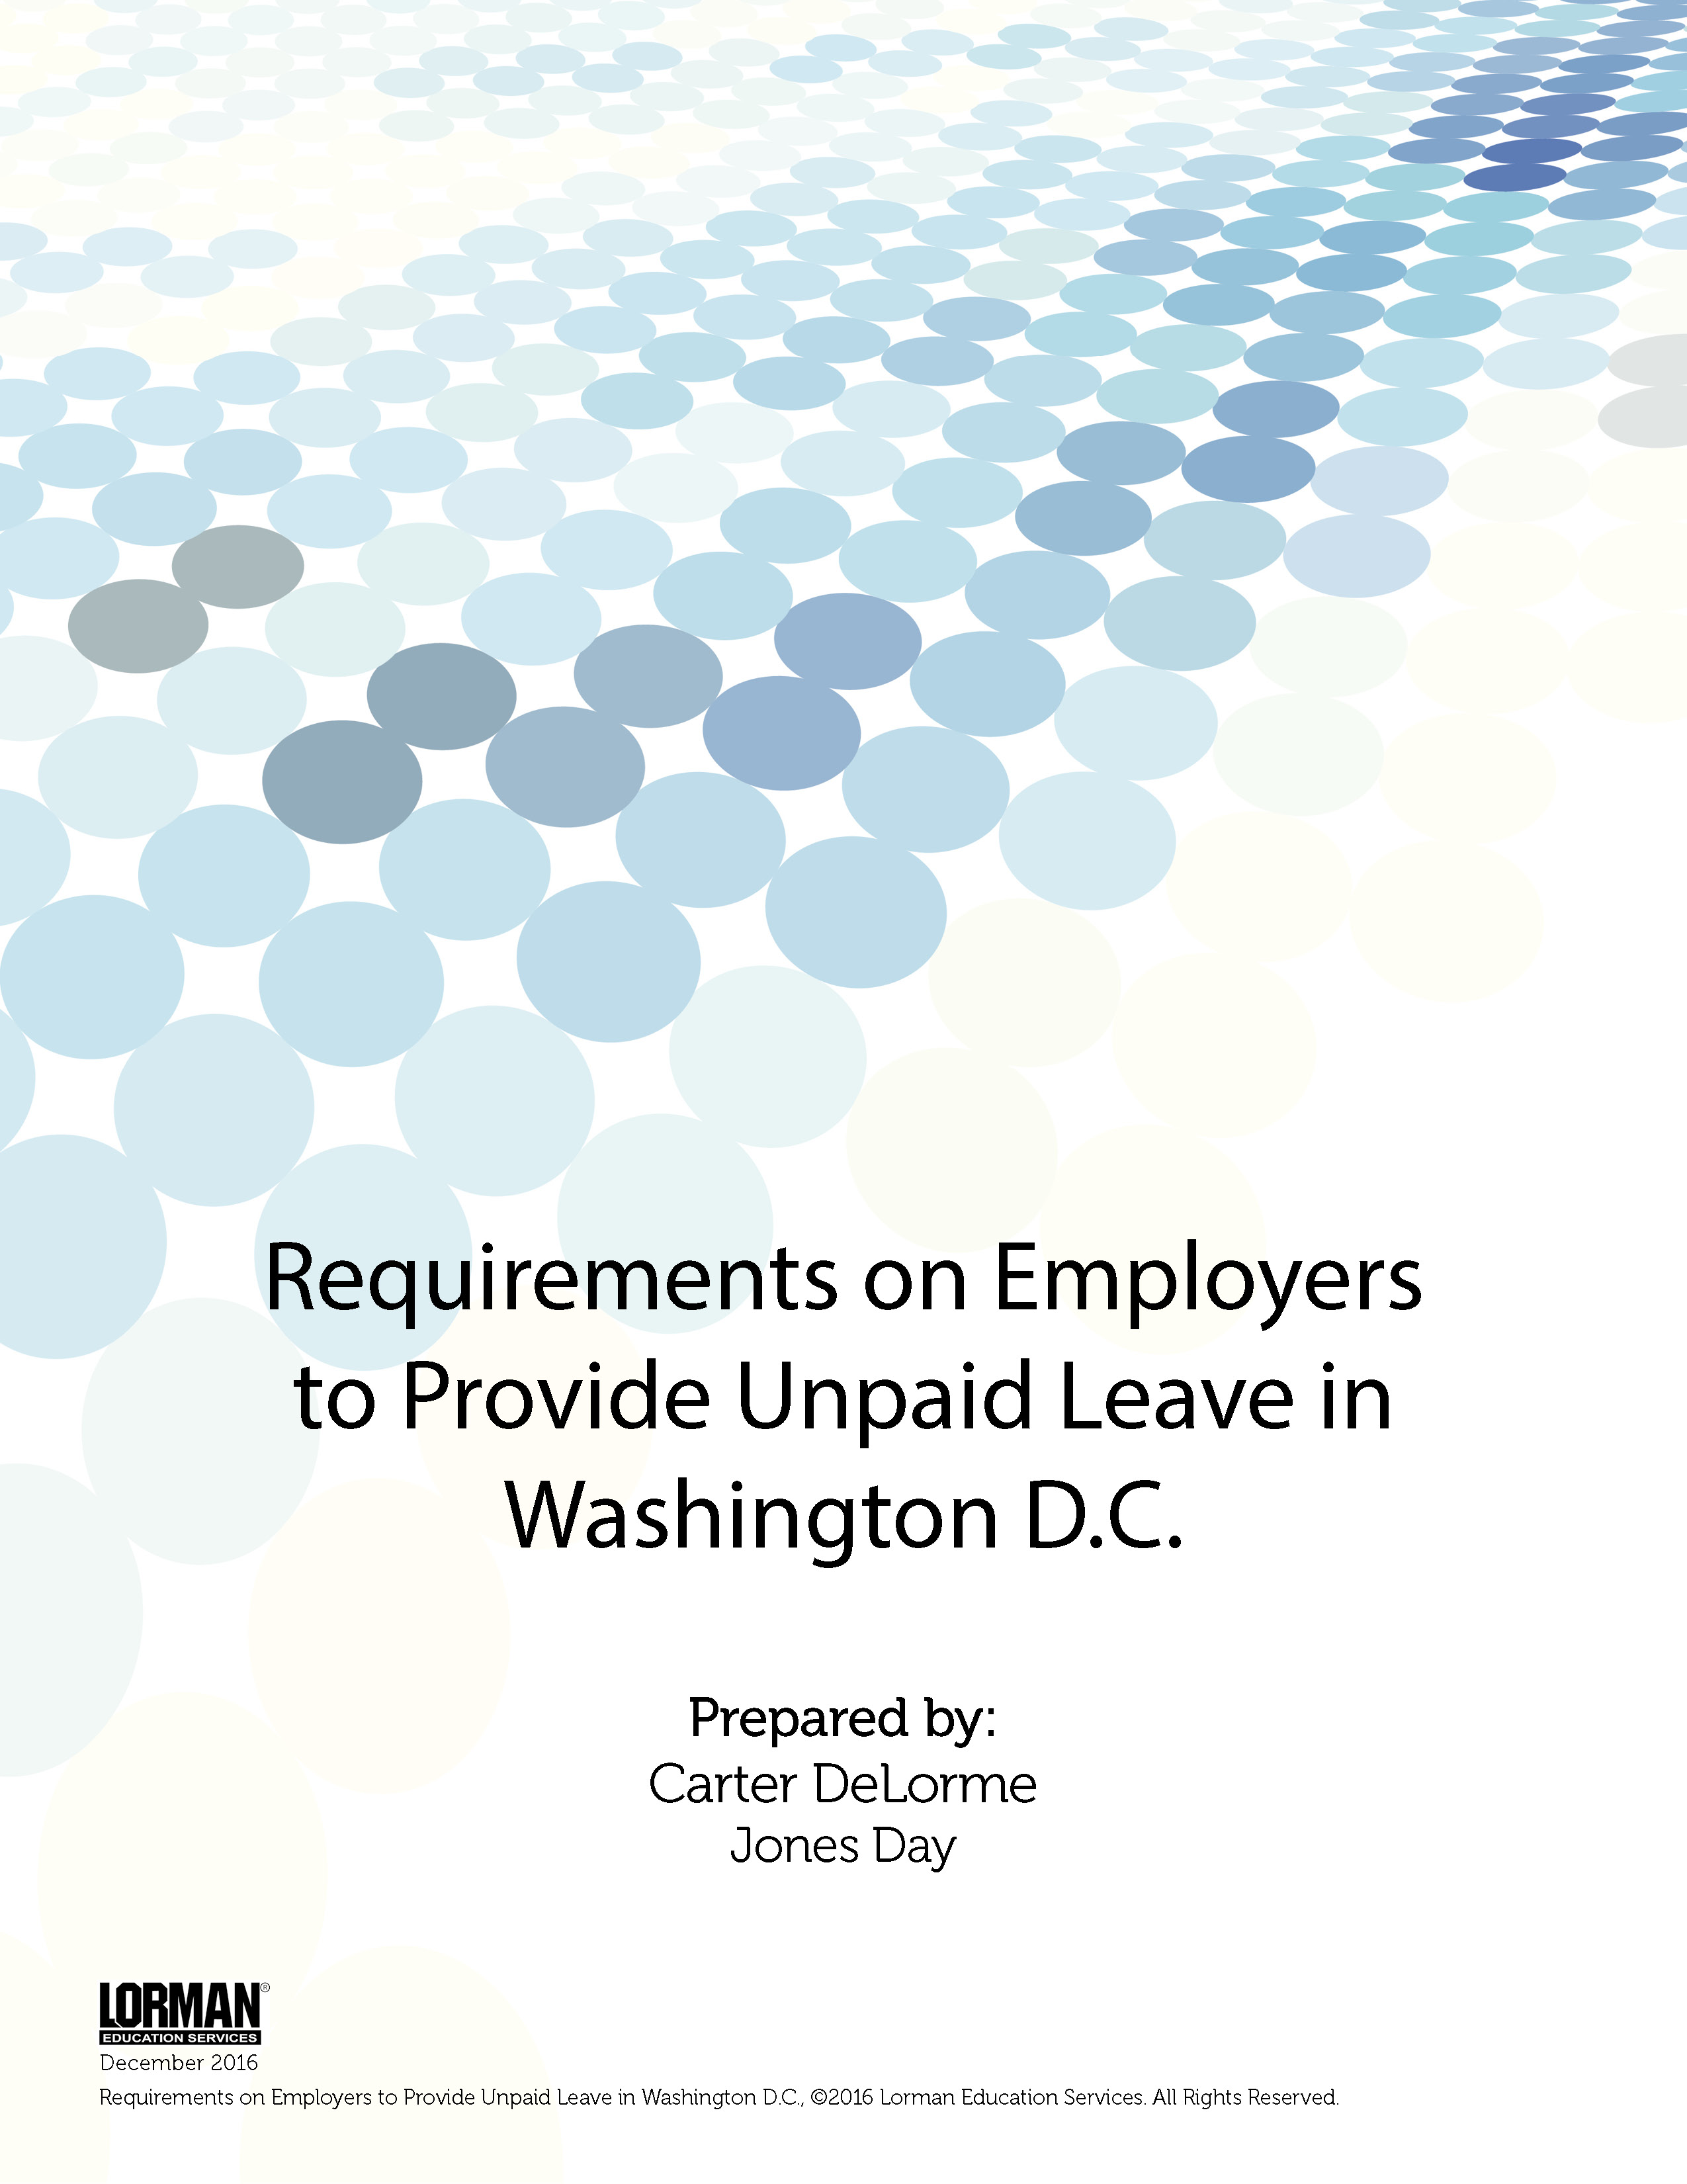 Requirements on Employers to Provide Unpaid Leave in Washington D.C.